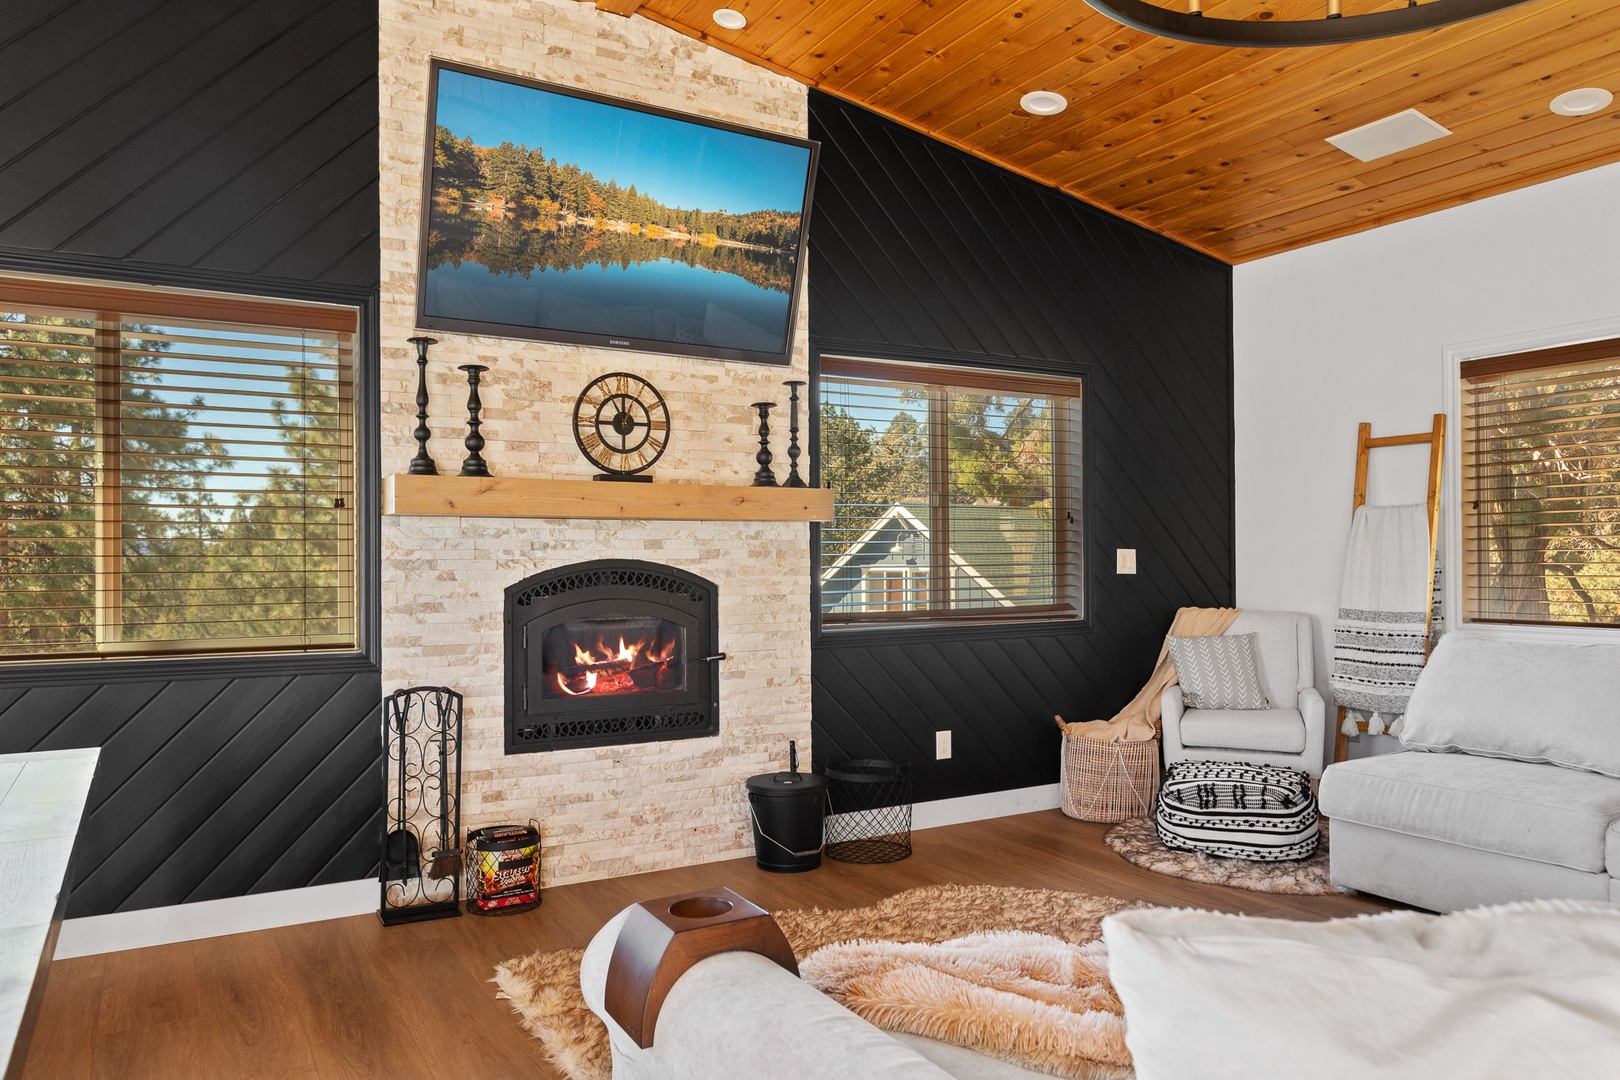 Living room features wood burning fireplace and SmartTV